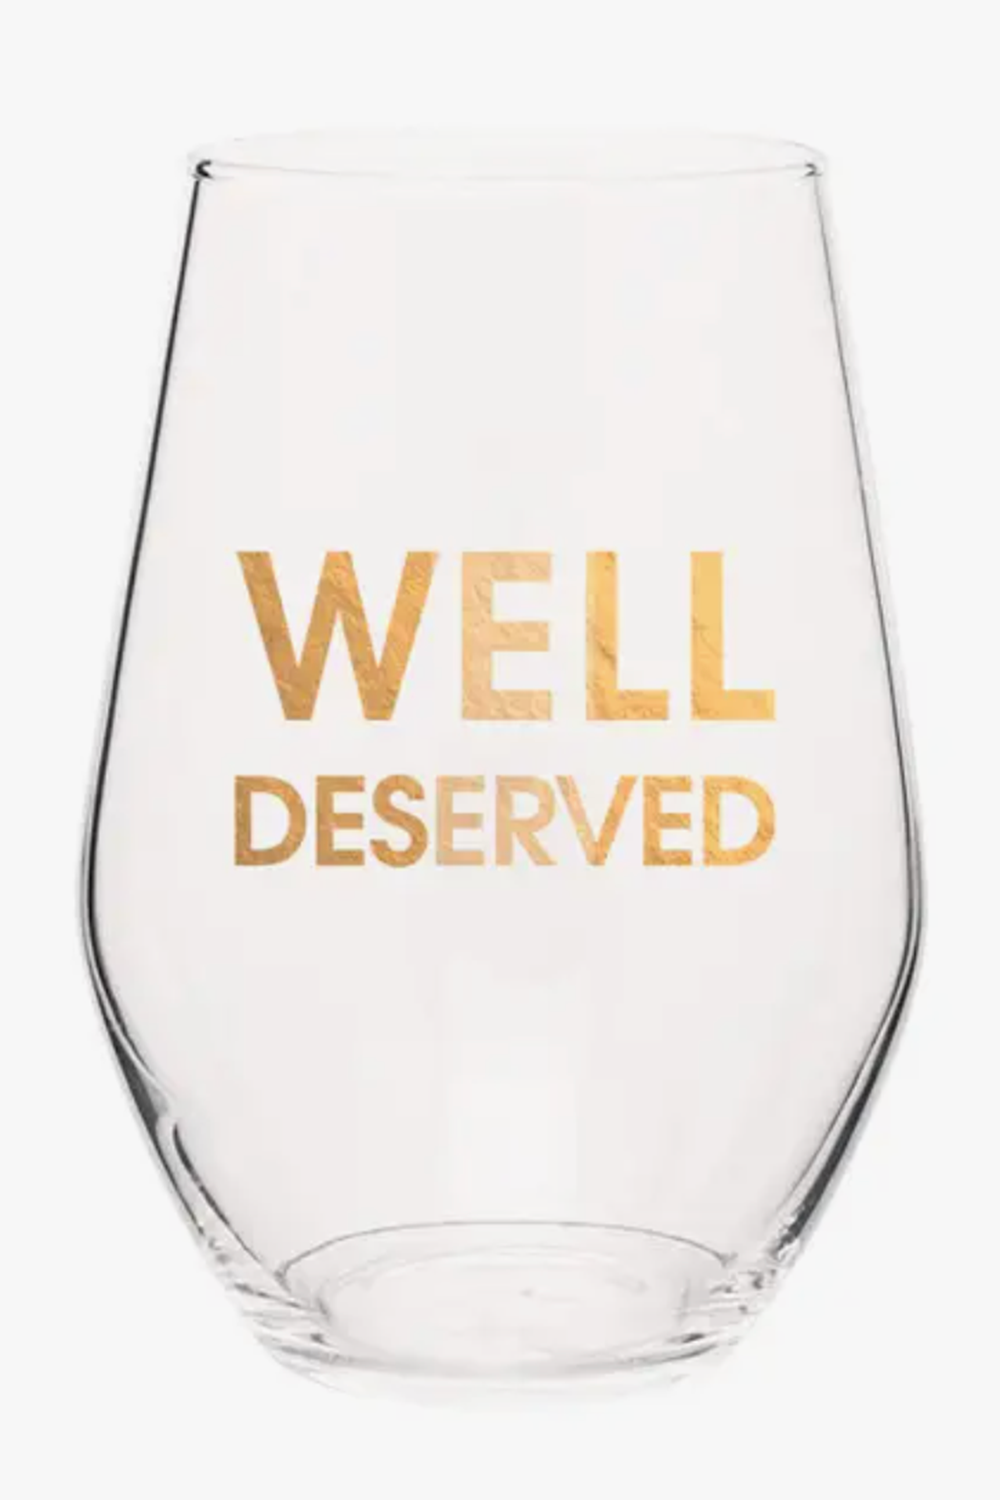 Gold Foil Wine Glass - Well Deserved